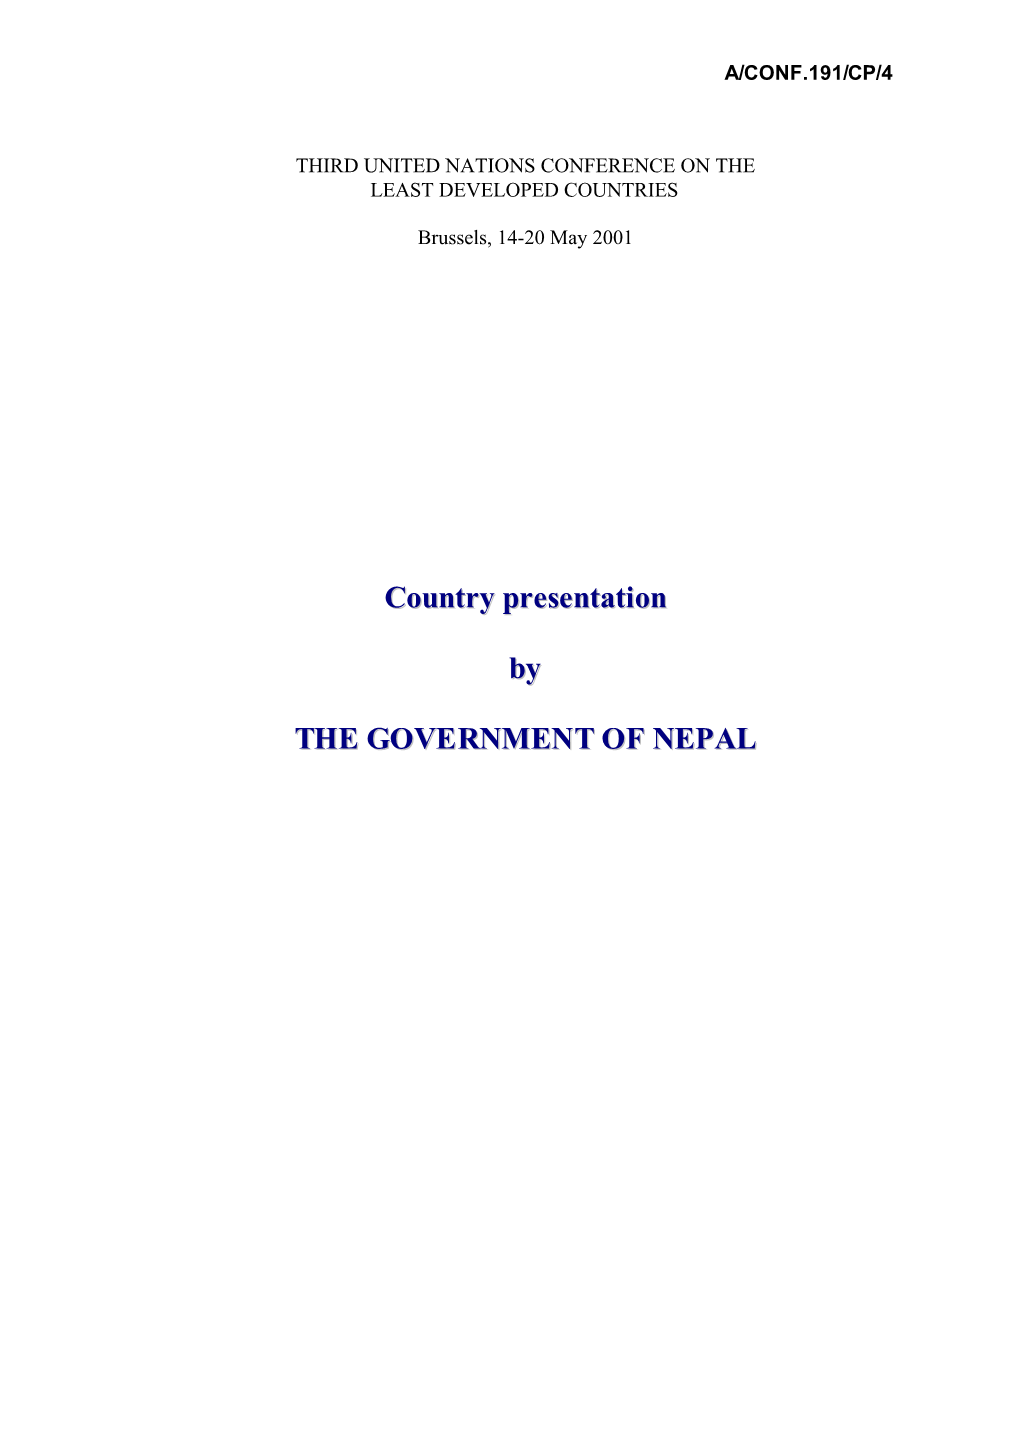 Country Presentation by the GOVERNMENT of NEPAL